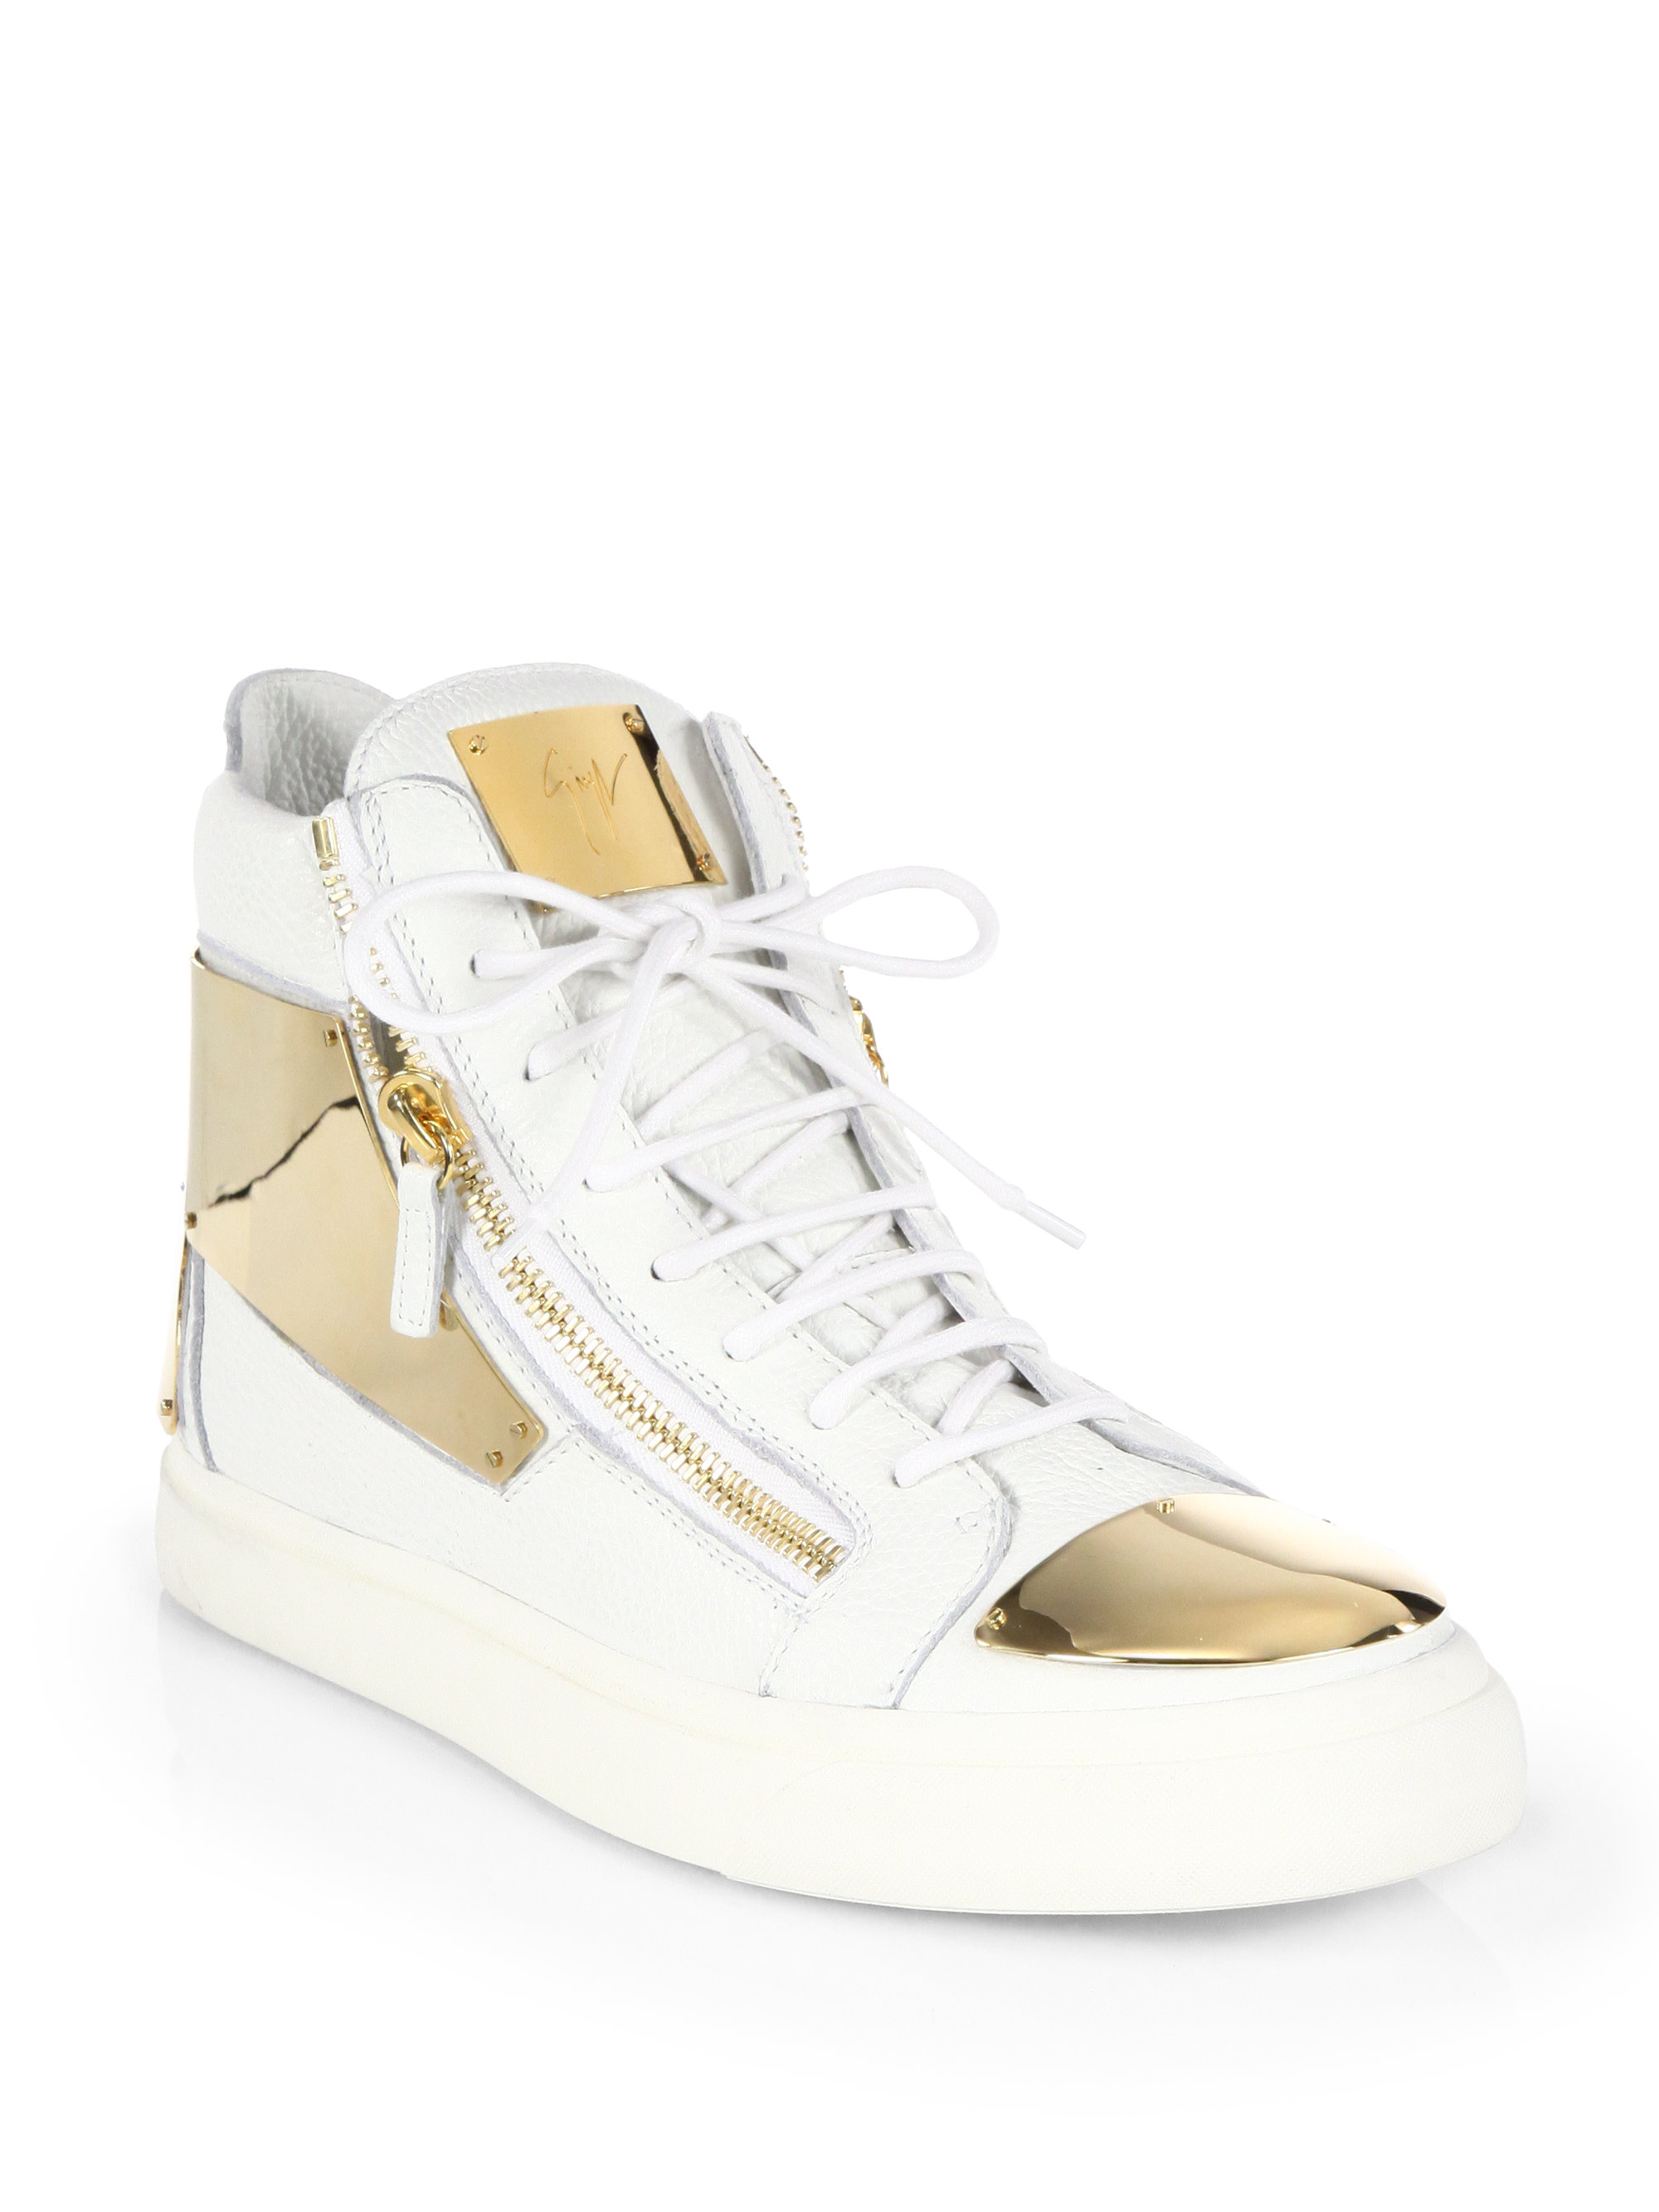 Giuseppe Zanotti Double Zip High-Top Sneakers in Gold (WHITE-GOLD) | Lyst